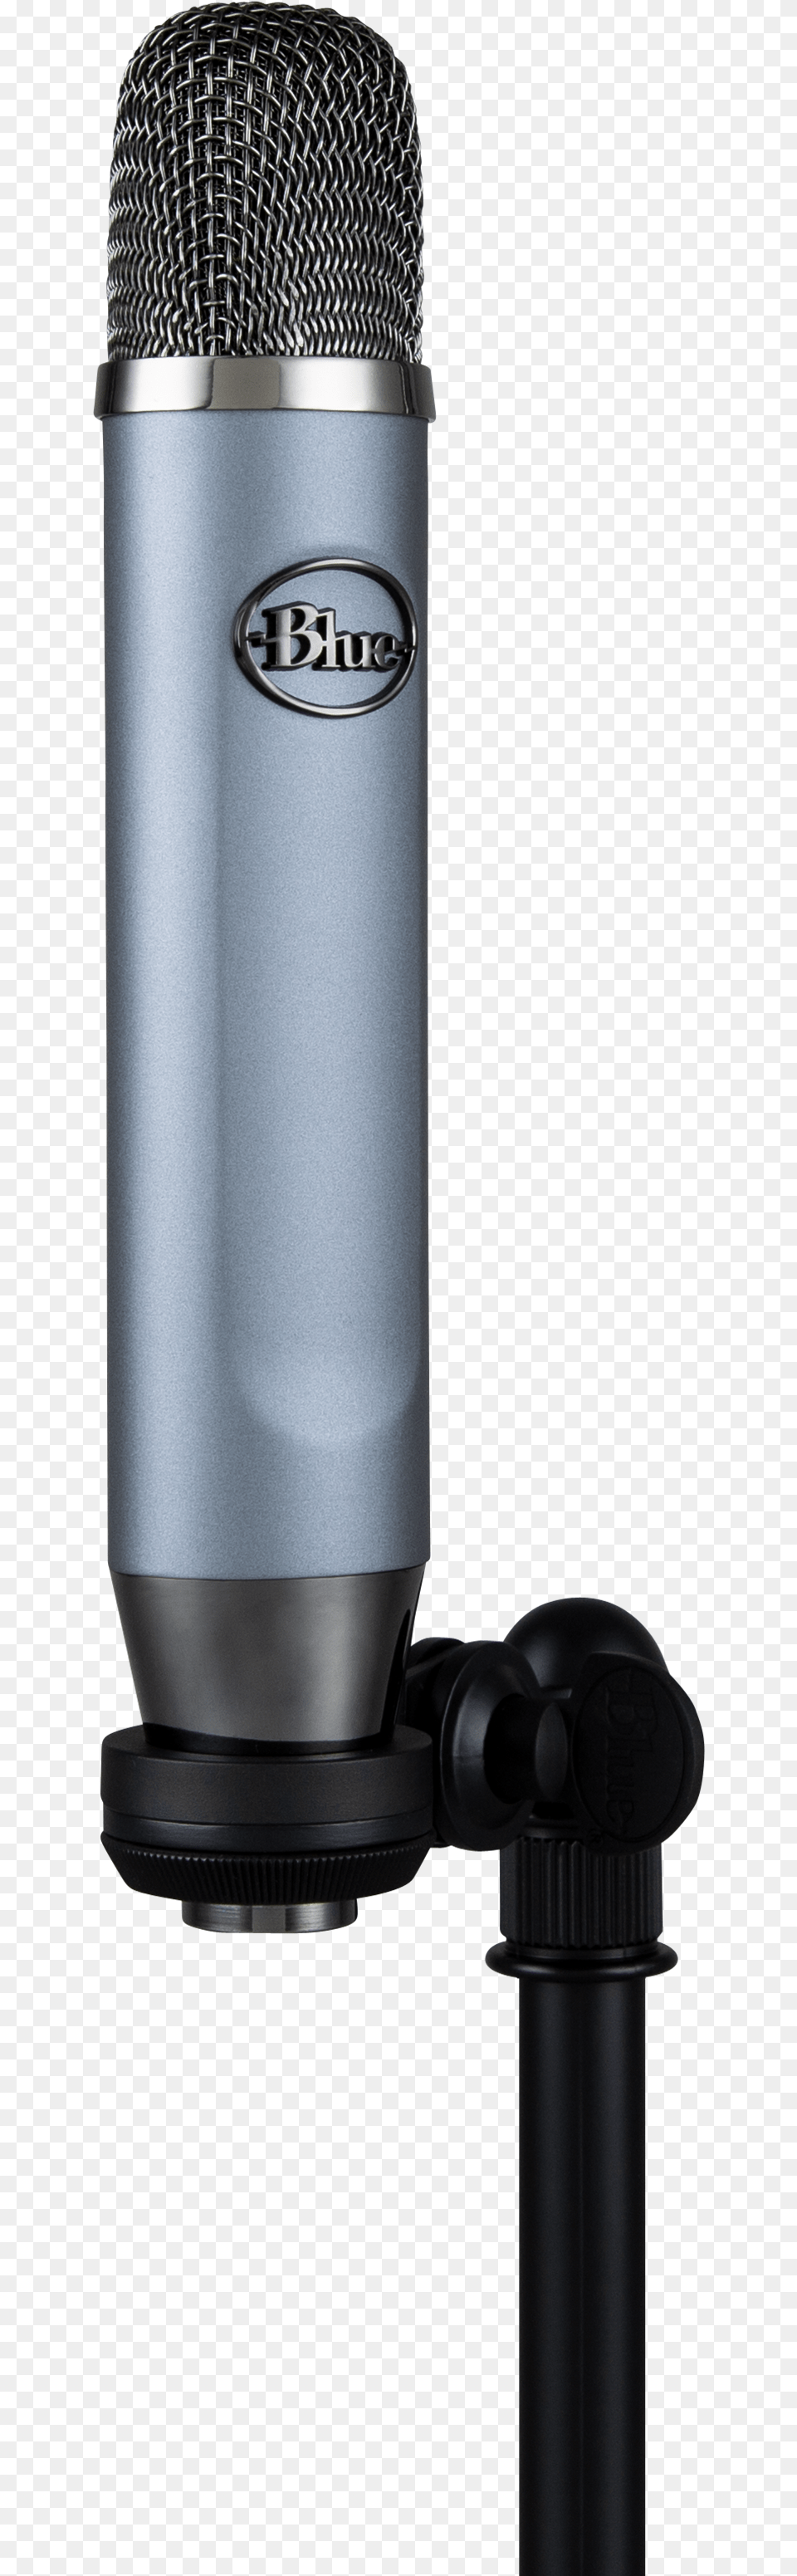 Blue Ember Microphone, Electrical Device Free Transparent Png